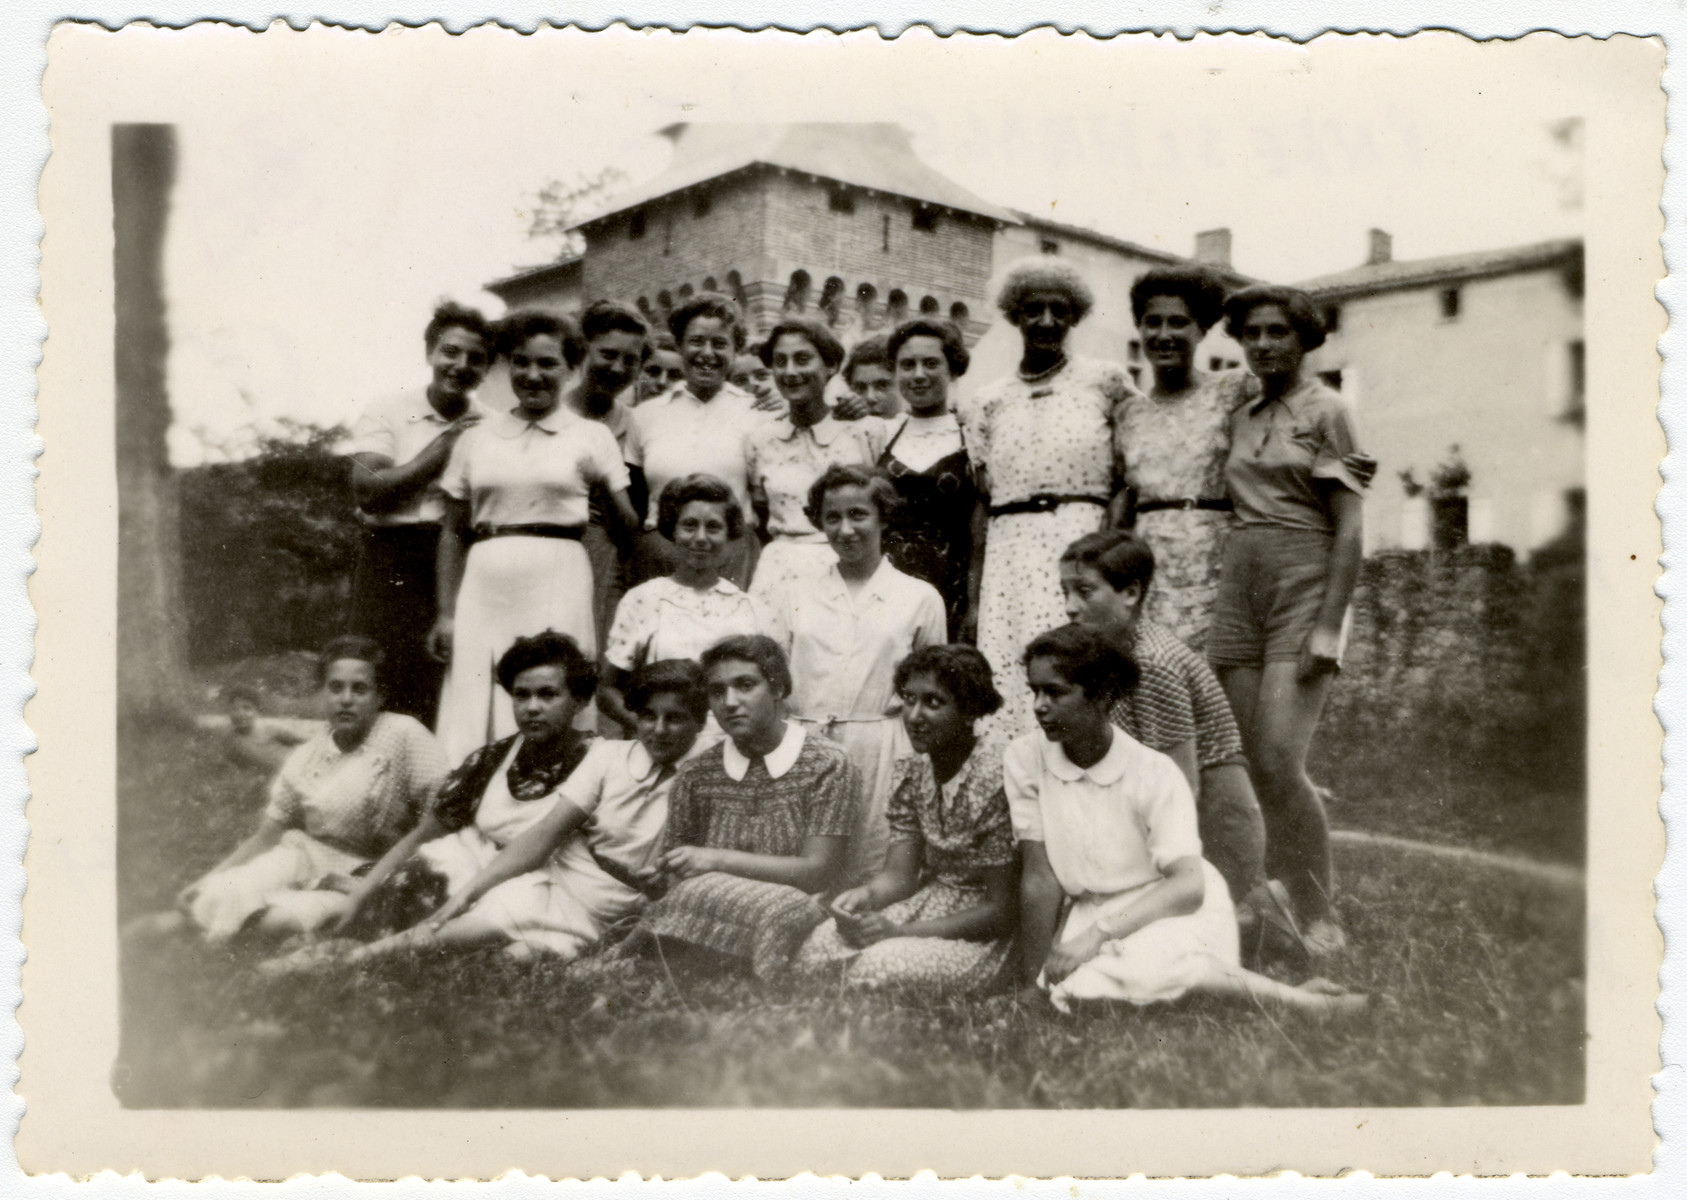 Young women and teachers pose for a group picture at the children's home of Chateau de la Hille.

Seated in foreground, from left: Almuth Koenigshoefer, Else Rosenblatt, Dela Hochberger, Lixie (Alix) Grabkowicz, Inge Helft and Edith Moser. Second row, kneeling, from left: Ilse Wulff, Margot Kern. Girl at right, possibly Martha Storosum.

Rear row, from left: Inge Joseph, Ruth Schuetz, Friedl Steinberg, (head in rear) Ruth Herz, Edith Goldapper,  (head in rear) unidentifiable, Ruth Klonower, (head in rear) Helga Klein, Inge Schragenheim, teacher Irène Frank, Ilse Bruenell, Rita Leistner.

Helft and Hochberger were caught fleeing to Switzerland in 1943, then deported and murdered in Auschwitz. Koenigshoefer, Rosenblatt, Moser, Wulff, Kern, Joseph, Goldapper, Klonower and Schragenheim escaped illegally to Switzerland in 1943 and survived. The others were hidden in Vichy France and survived.